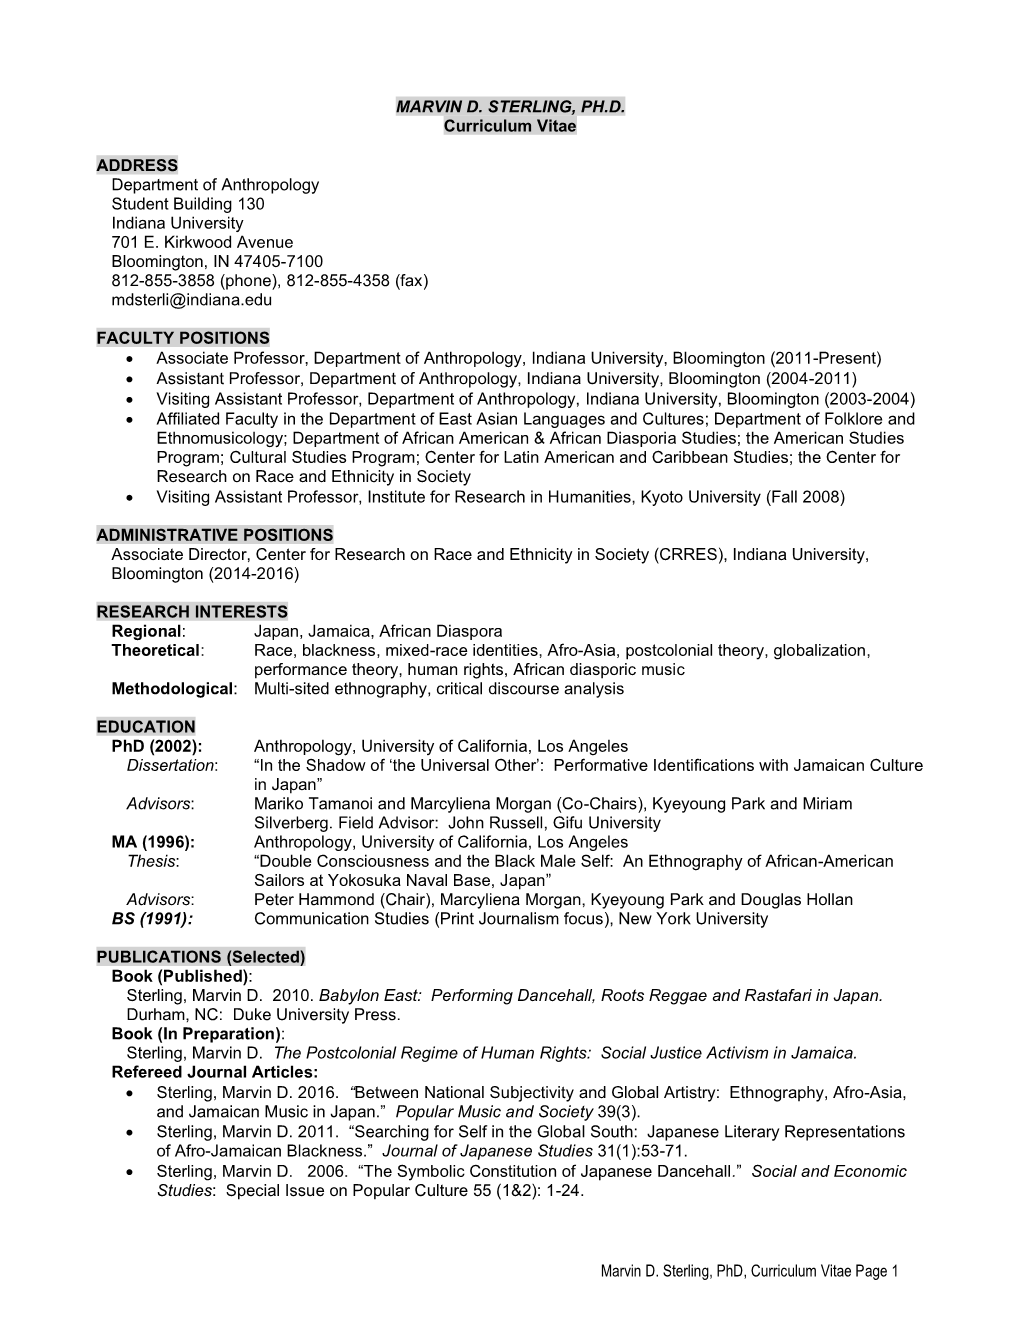 Marvin D. Sterling, Phd, Curriculum Vitae Page 1 MARVIN D